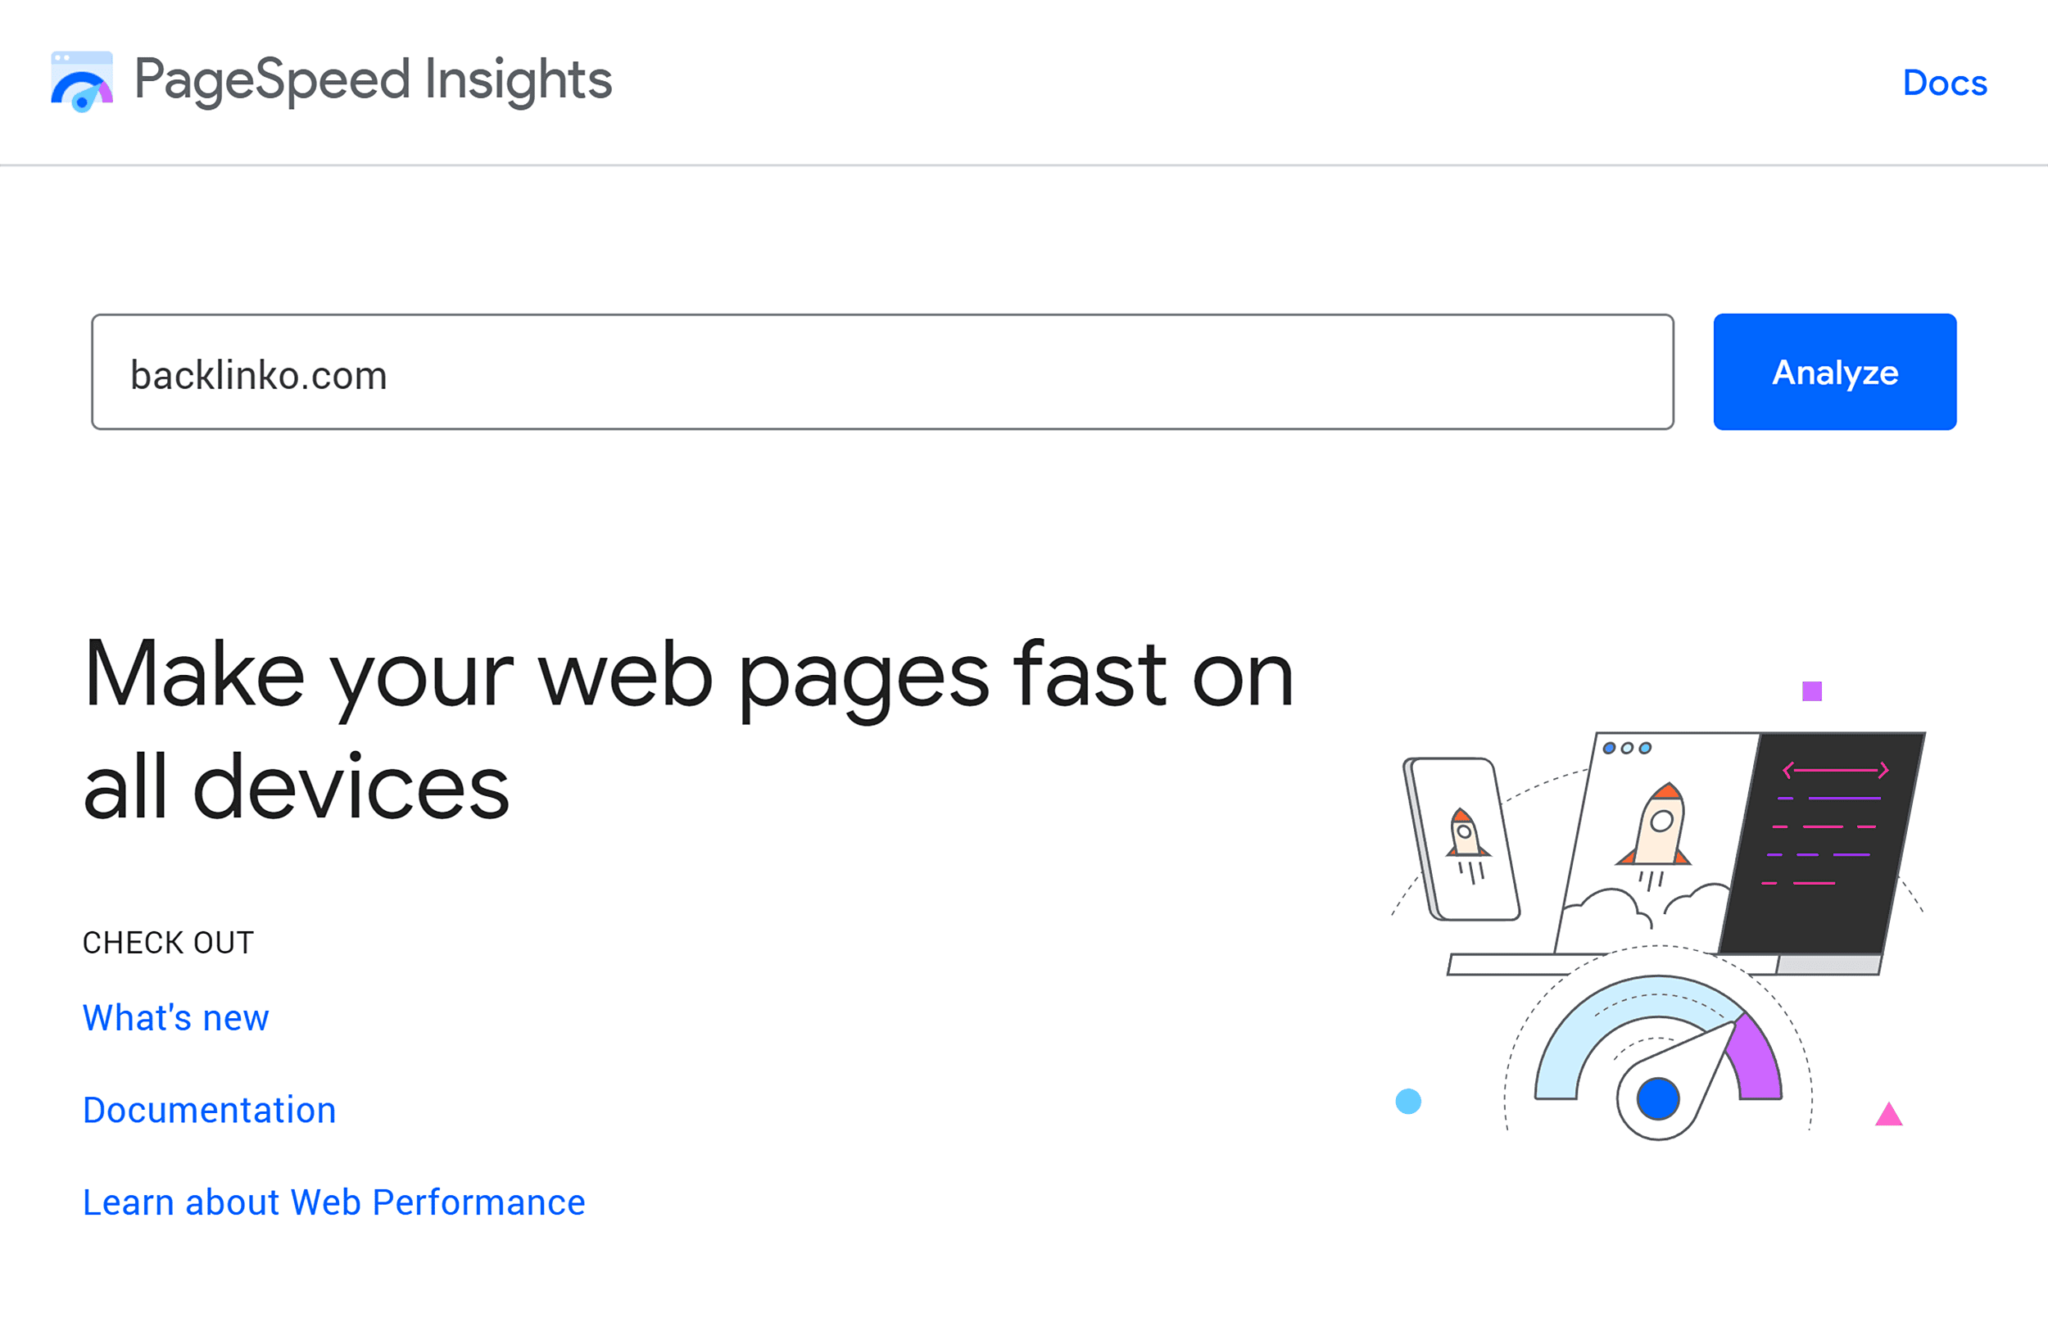 pagespeed-insights 29 Top Digital Marketing Tools for Every Budget